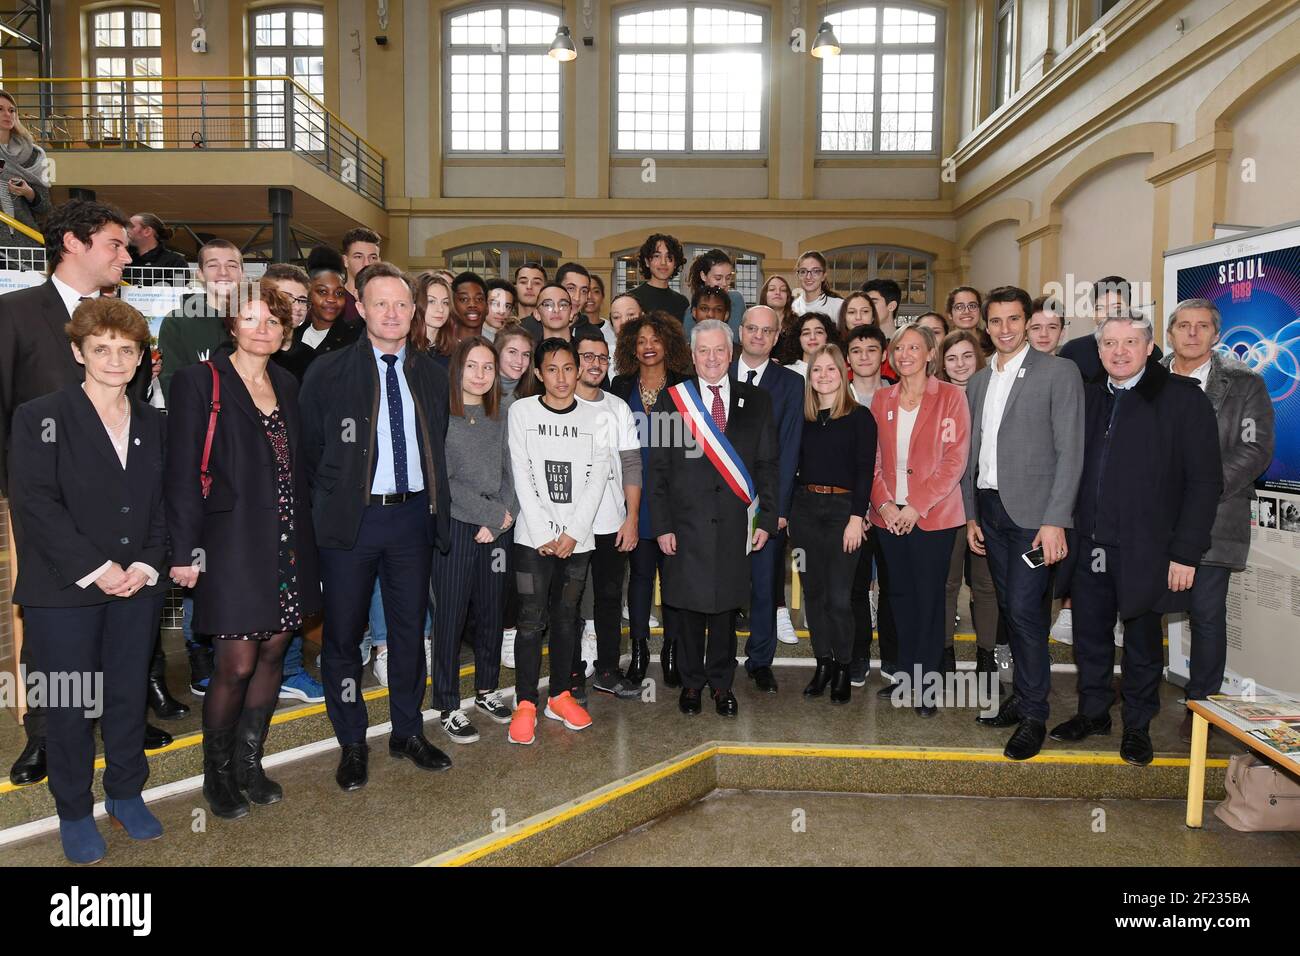 Mayor of Vanves Bernard Gauducheau with President of Paris 2024 Tony Estanguet, Secretary of State for Persons with Disabilities Sophie Cluzet, French Minister of National Education Jean-Michel Blanquet, French Sports Minister Laura Flessel, during the Olympic and Paralympic Week at the Cite scolaire Michelet, in Vanves, France, on January 29, 2018 - Photo Philippe Millereau / KMSP / DPPI Stock Photo